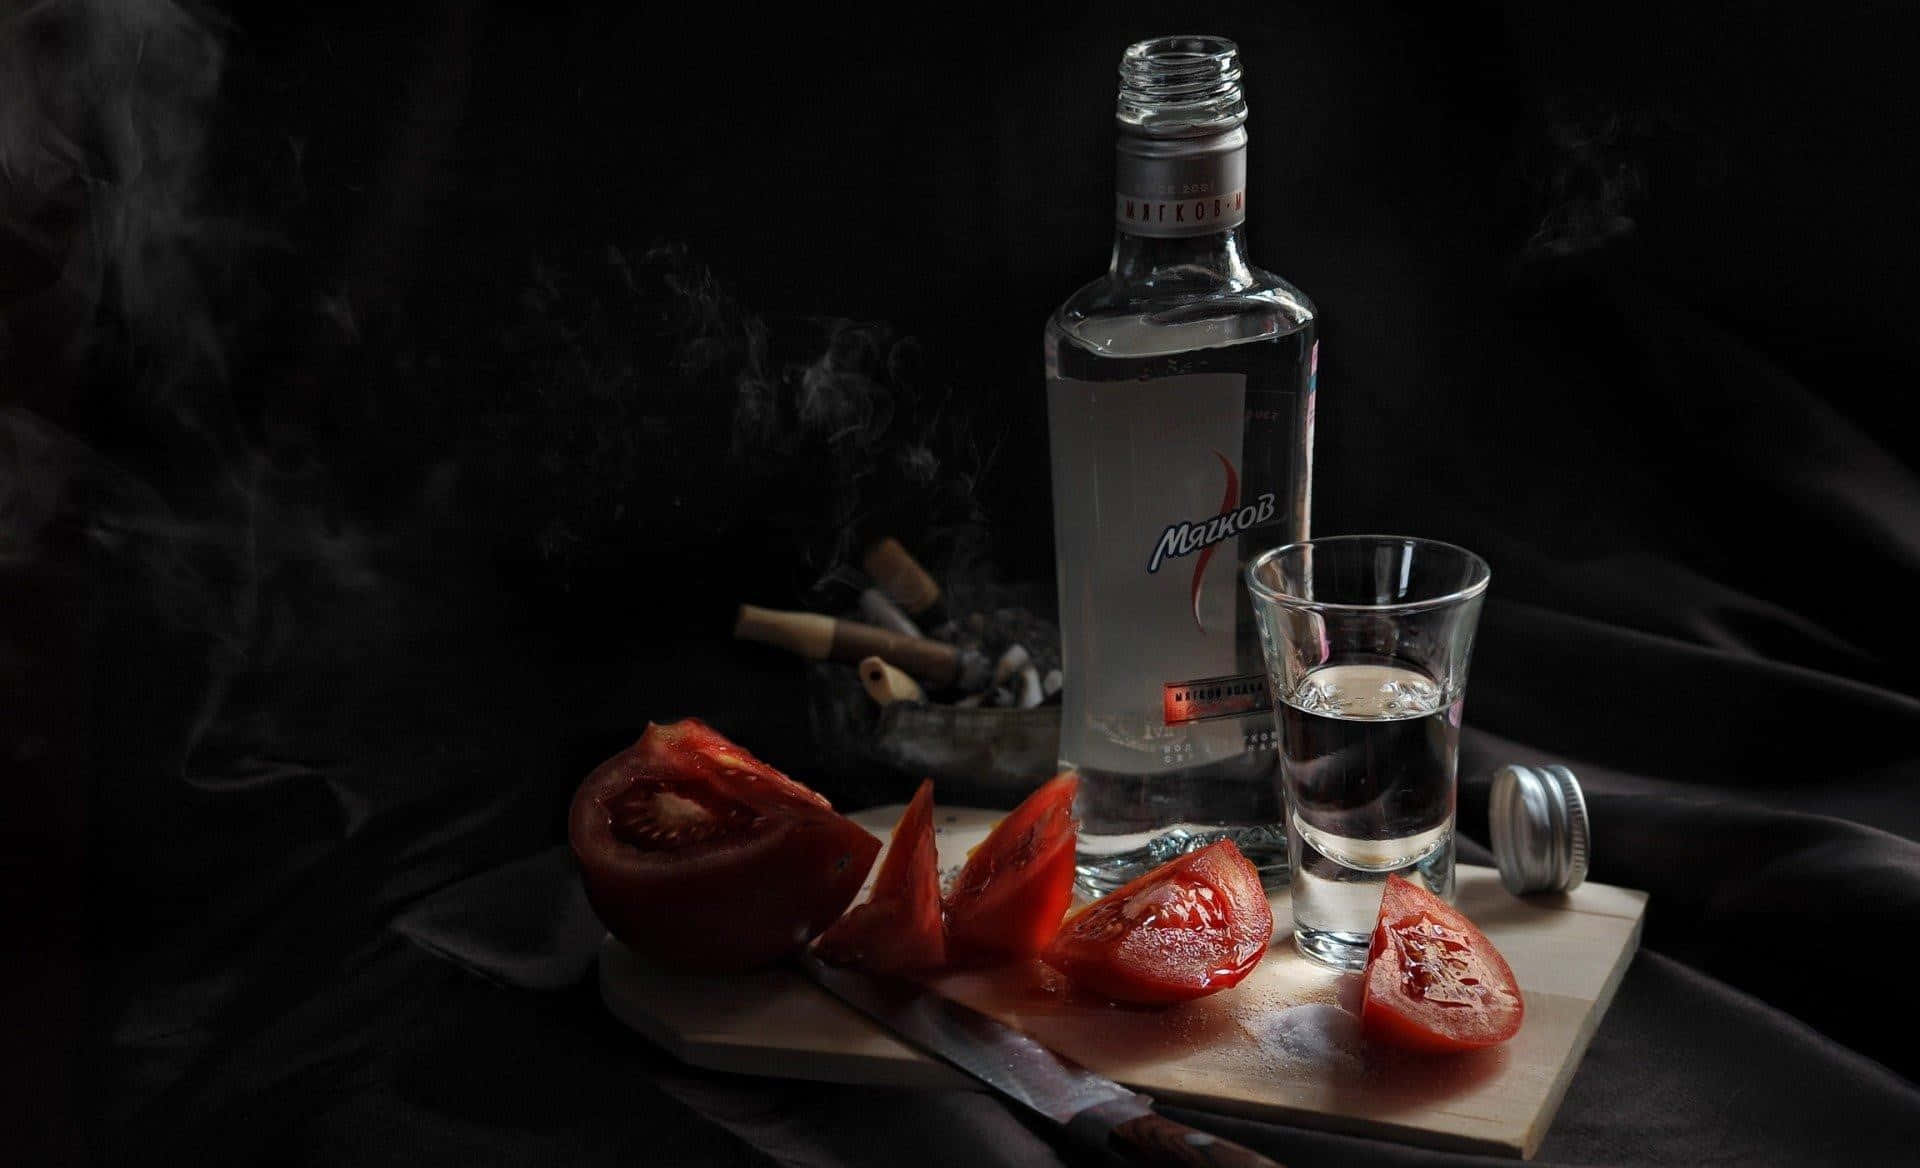 A Bottle Of Vodka And Tomatoes On A Cutting Board